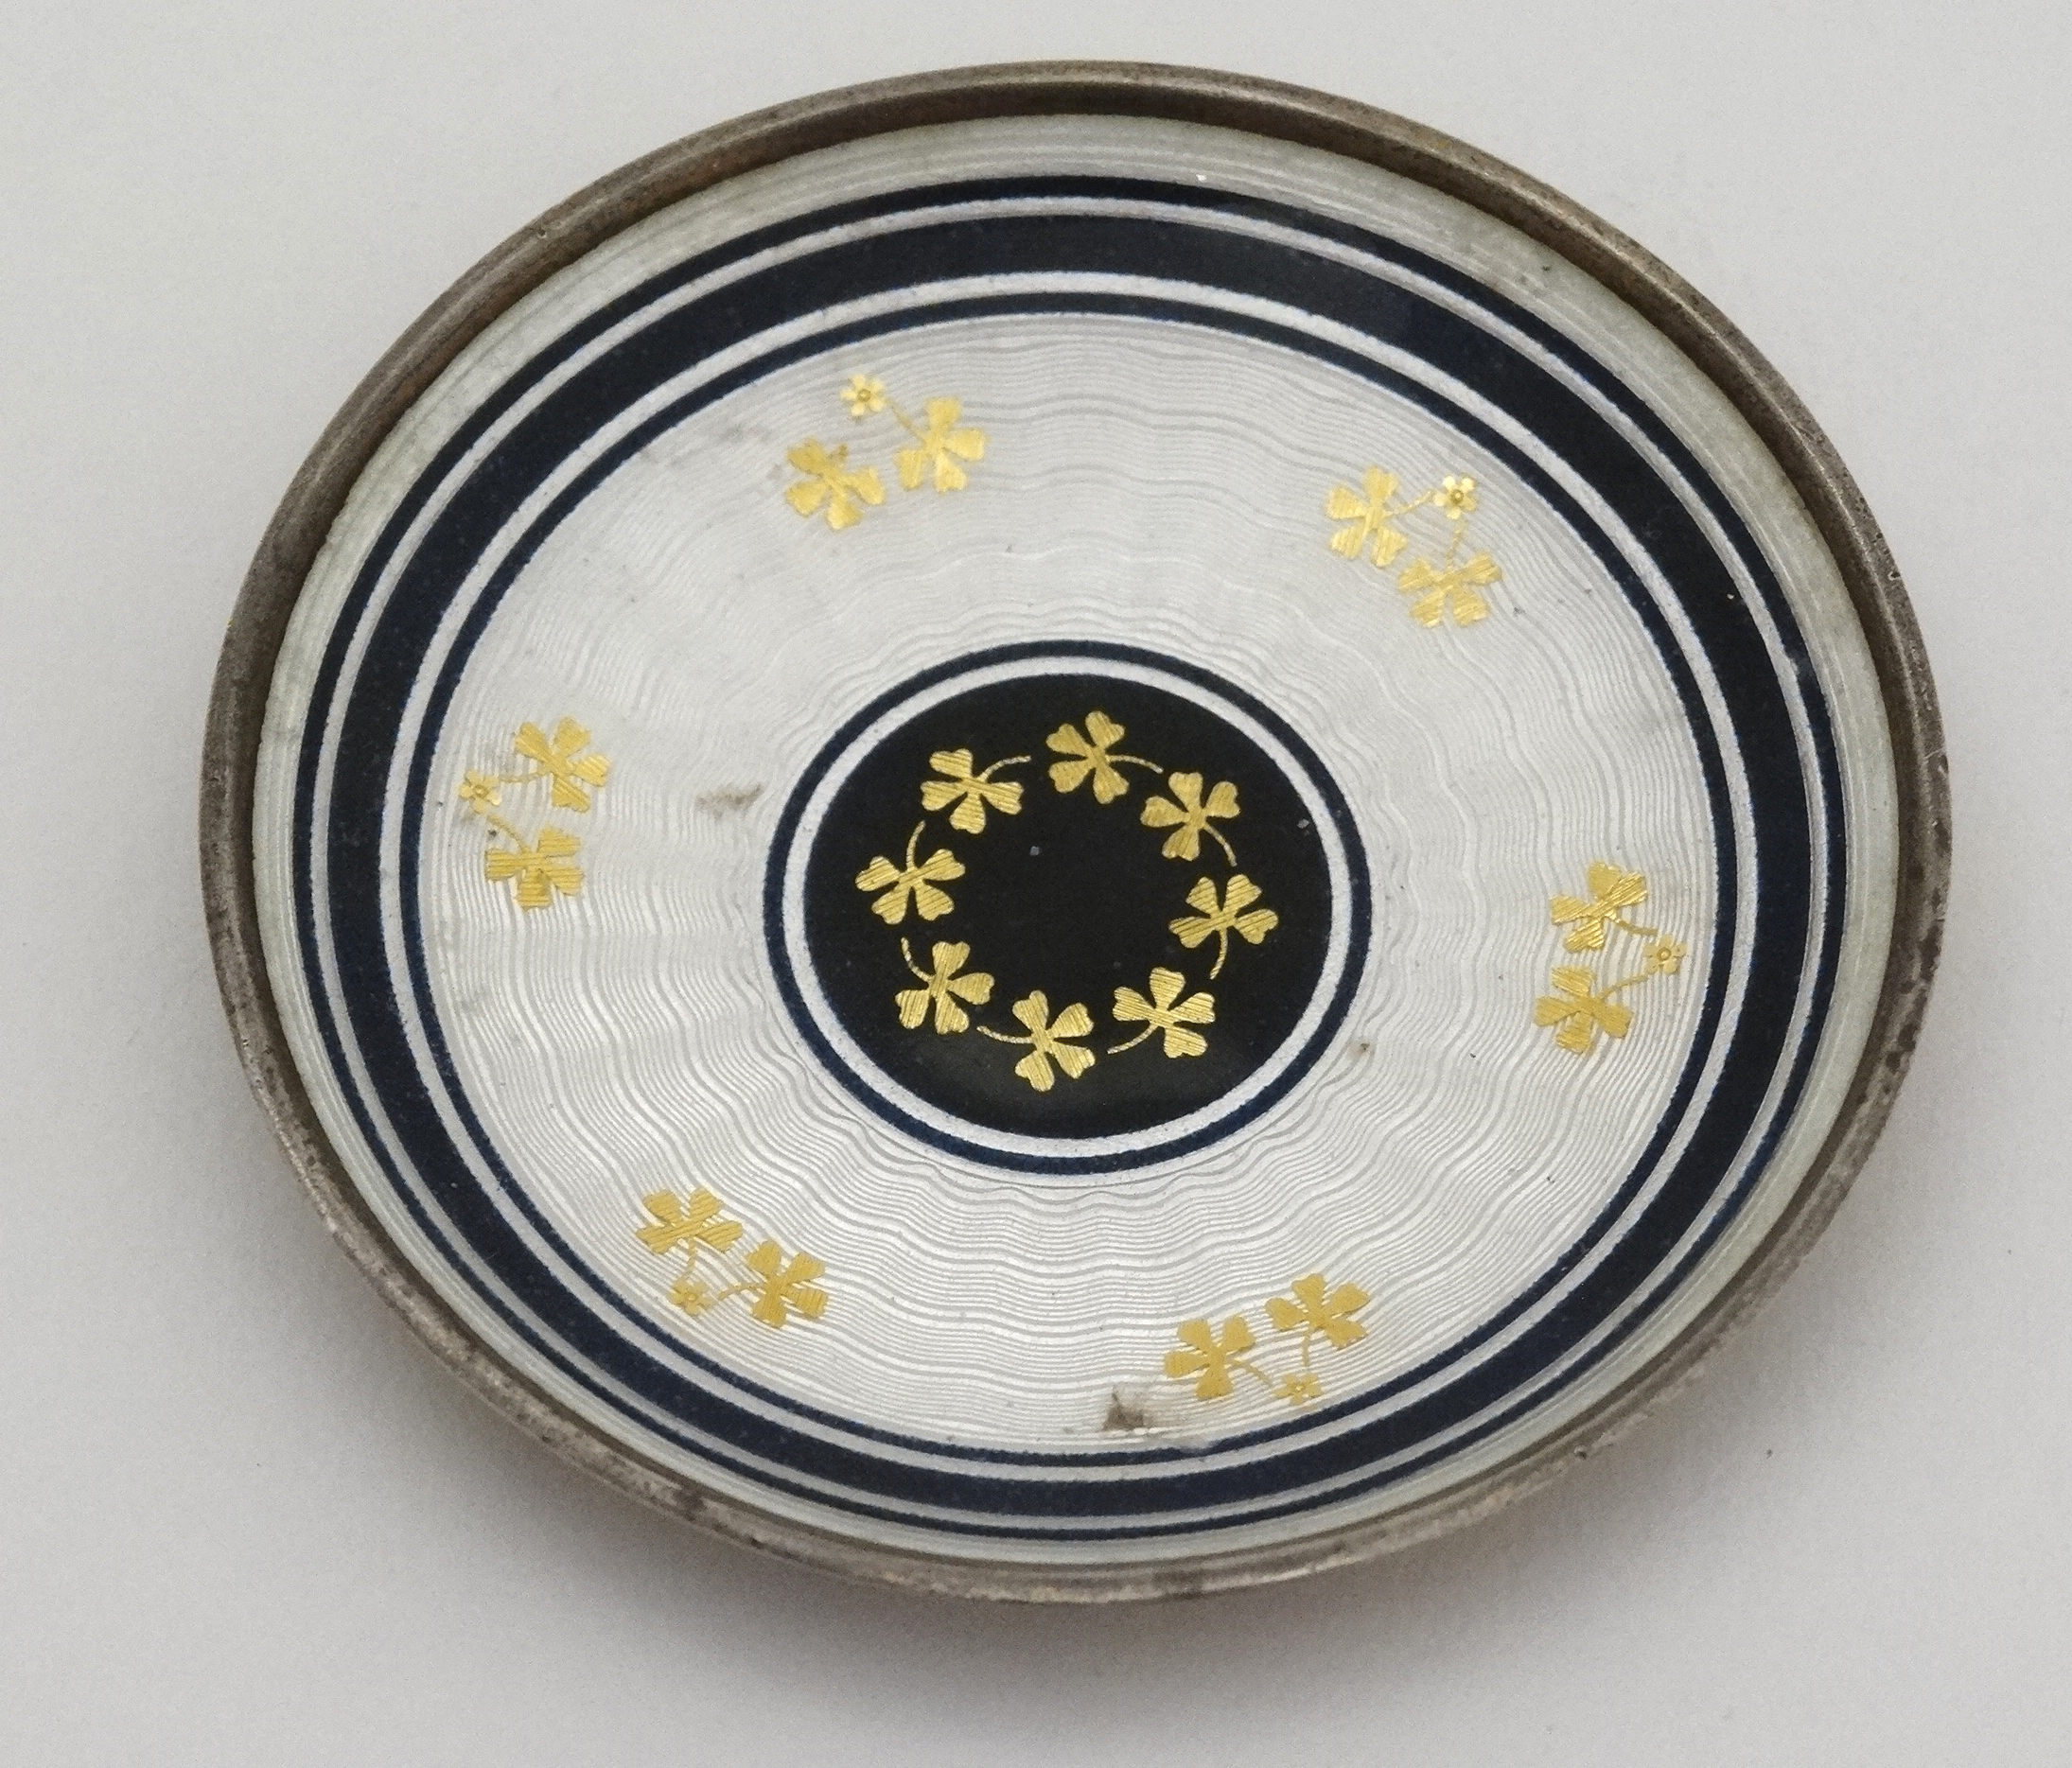 A Continental silver pin dish with guilloché enamel decoration 2 1/4" diameter. - Image 5 of 6